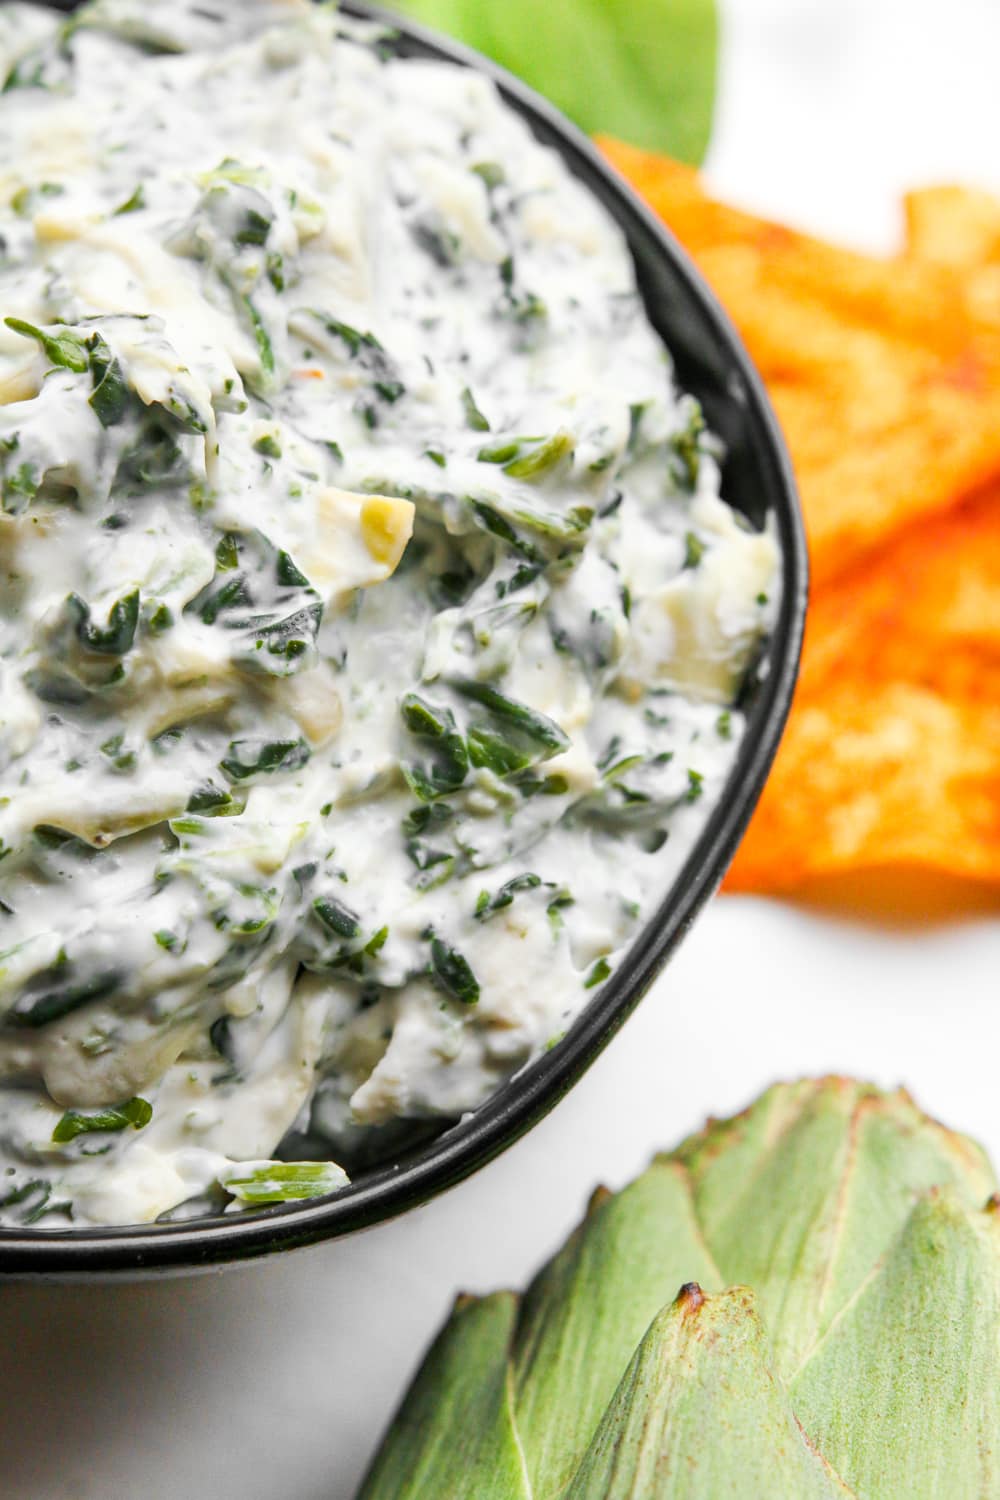 An up close view of low carb spinach and artichoke dip in a bowl.